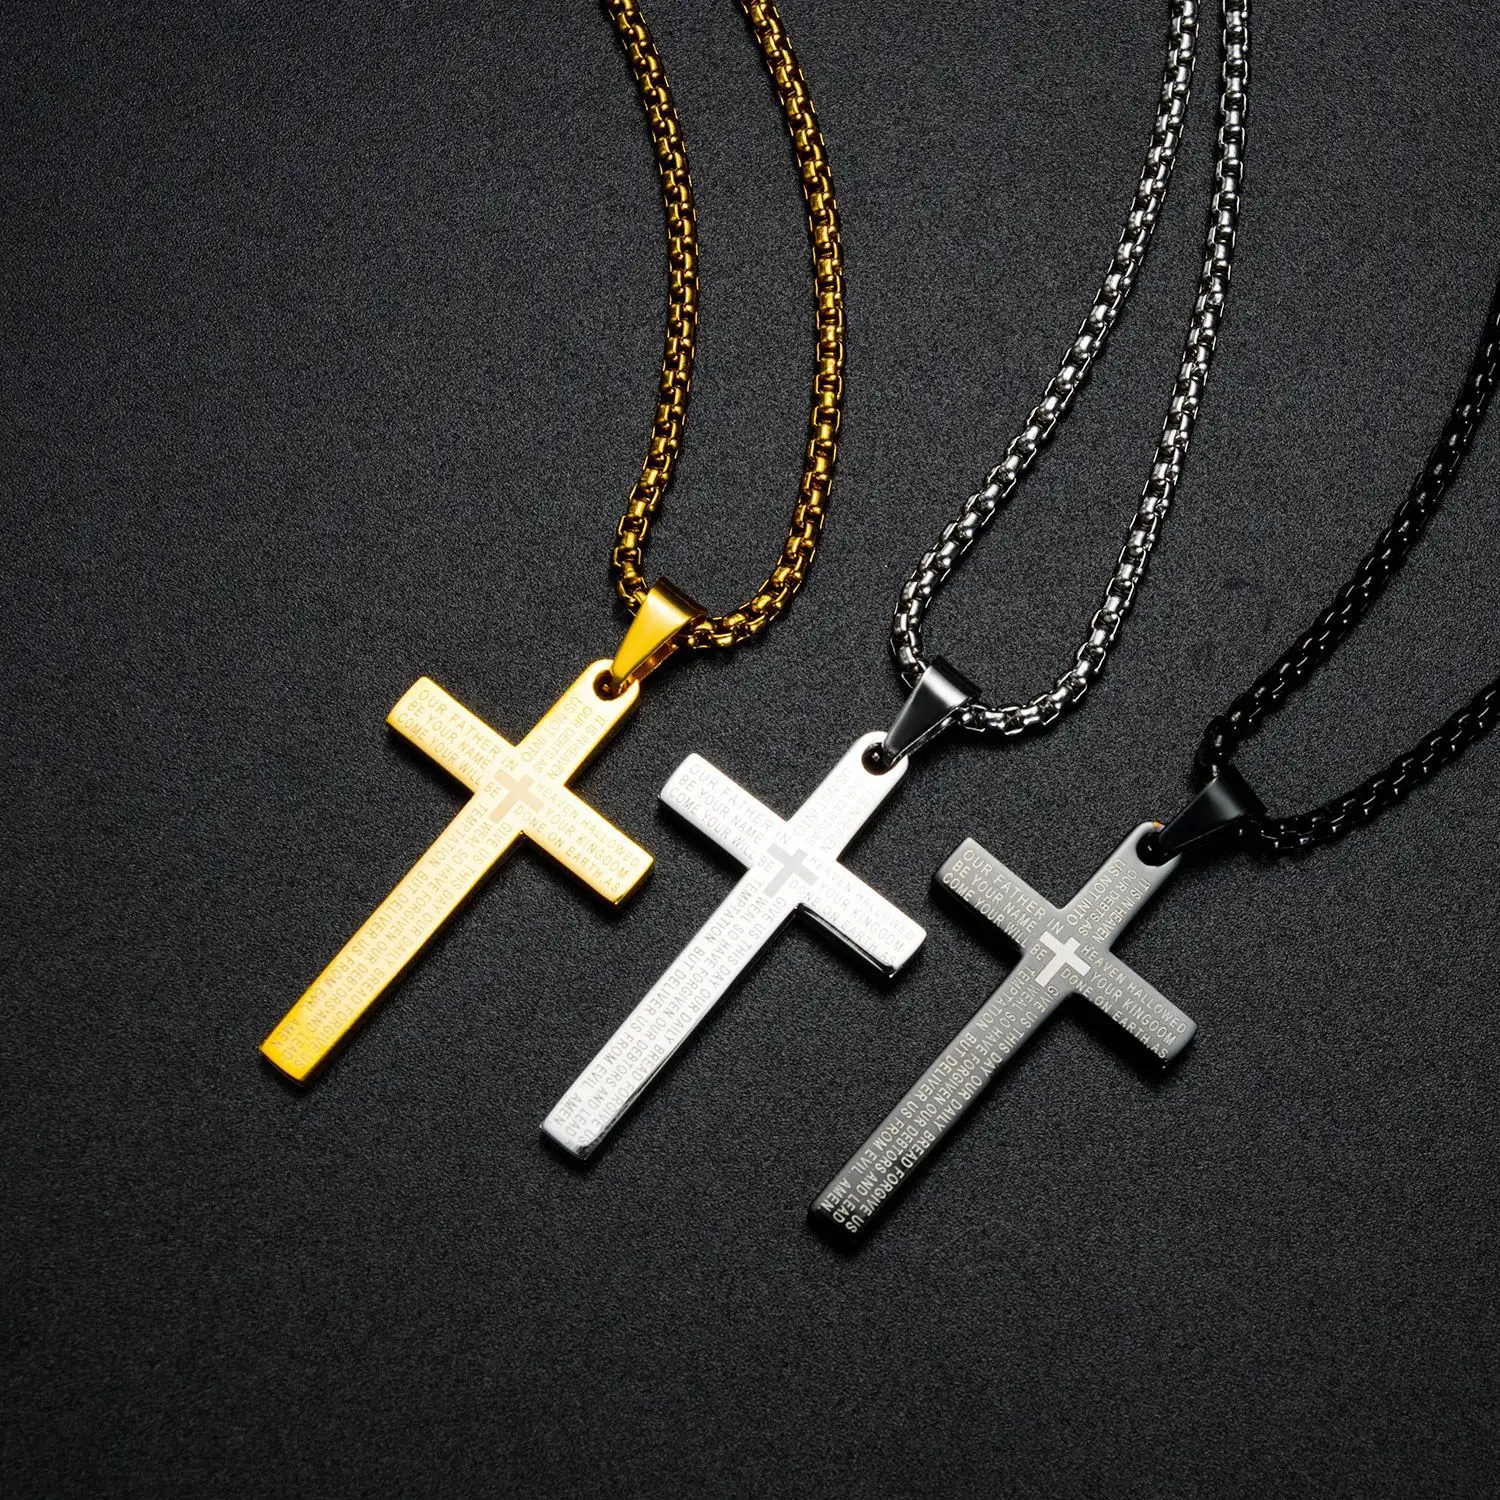 Fashion Scripture Stainless Steel Cross necklace and pendants for men cross pendant men necklace